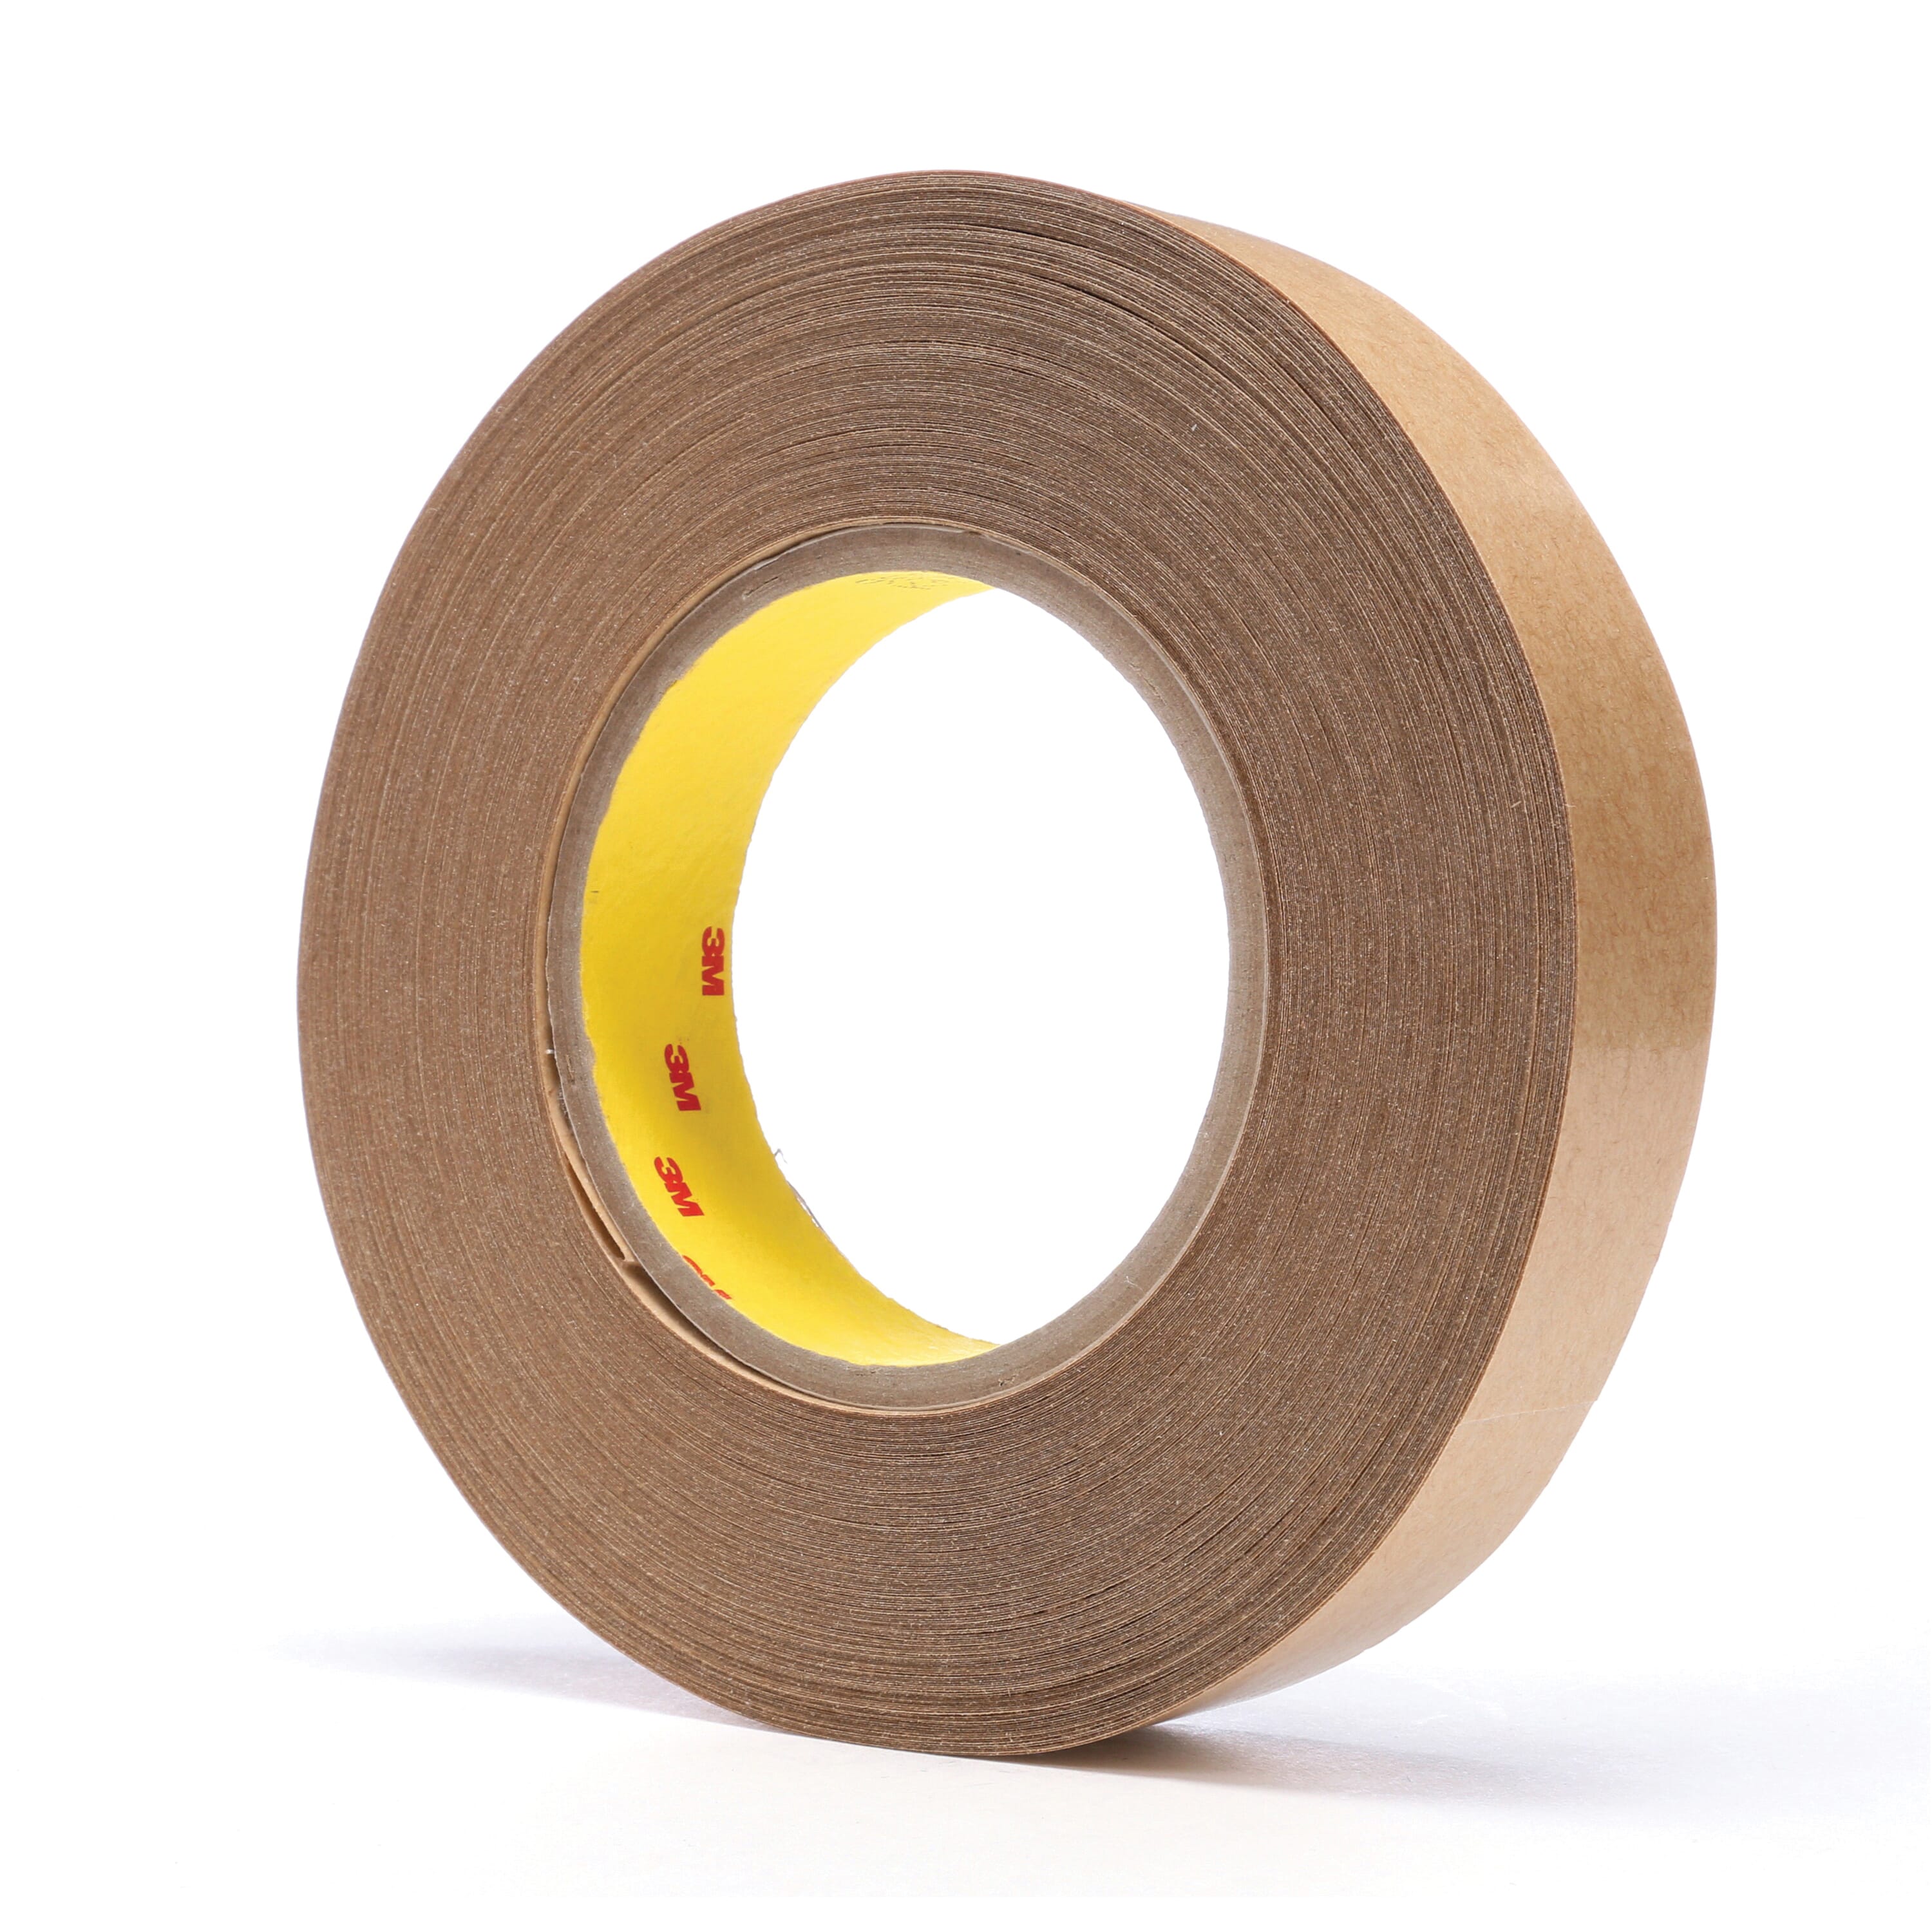 3M™ 7000048430 High Tack Adhesive Transfer Tape, 60 yd L x 1 in W, 8.5 mil THK, 5 mil 300 Acrylic Adhesive, Clear